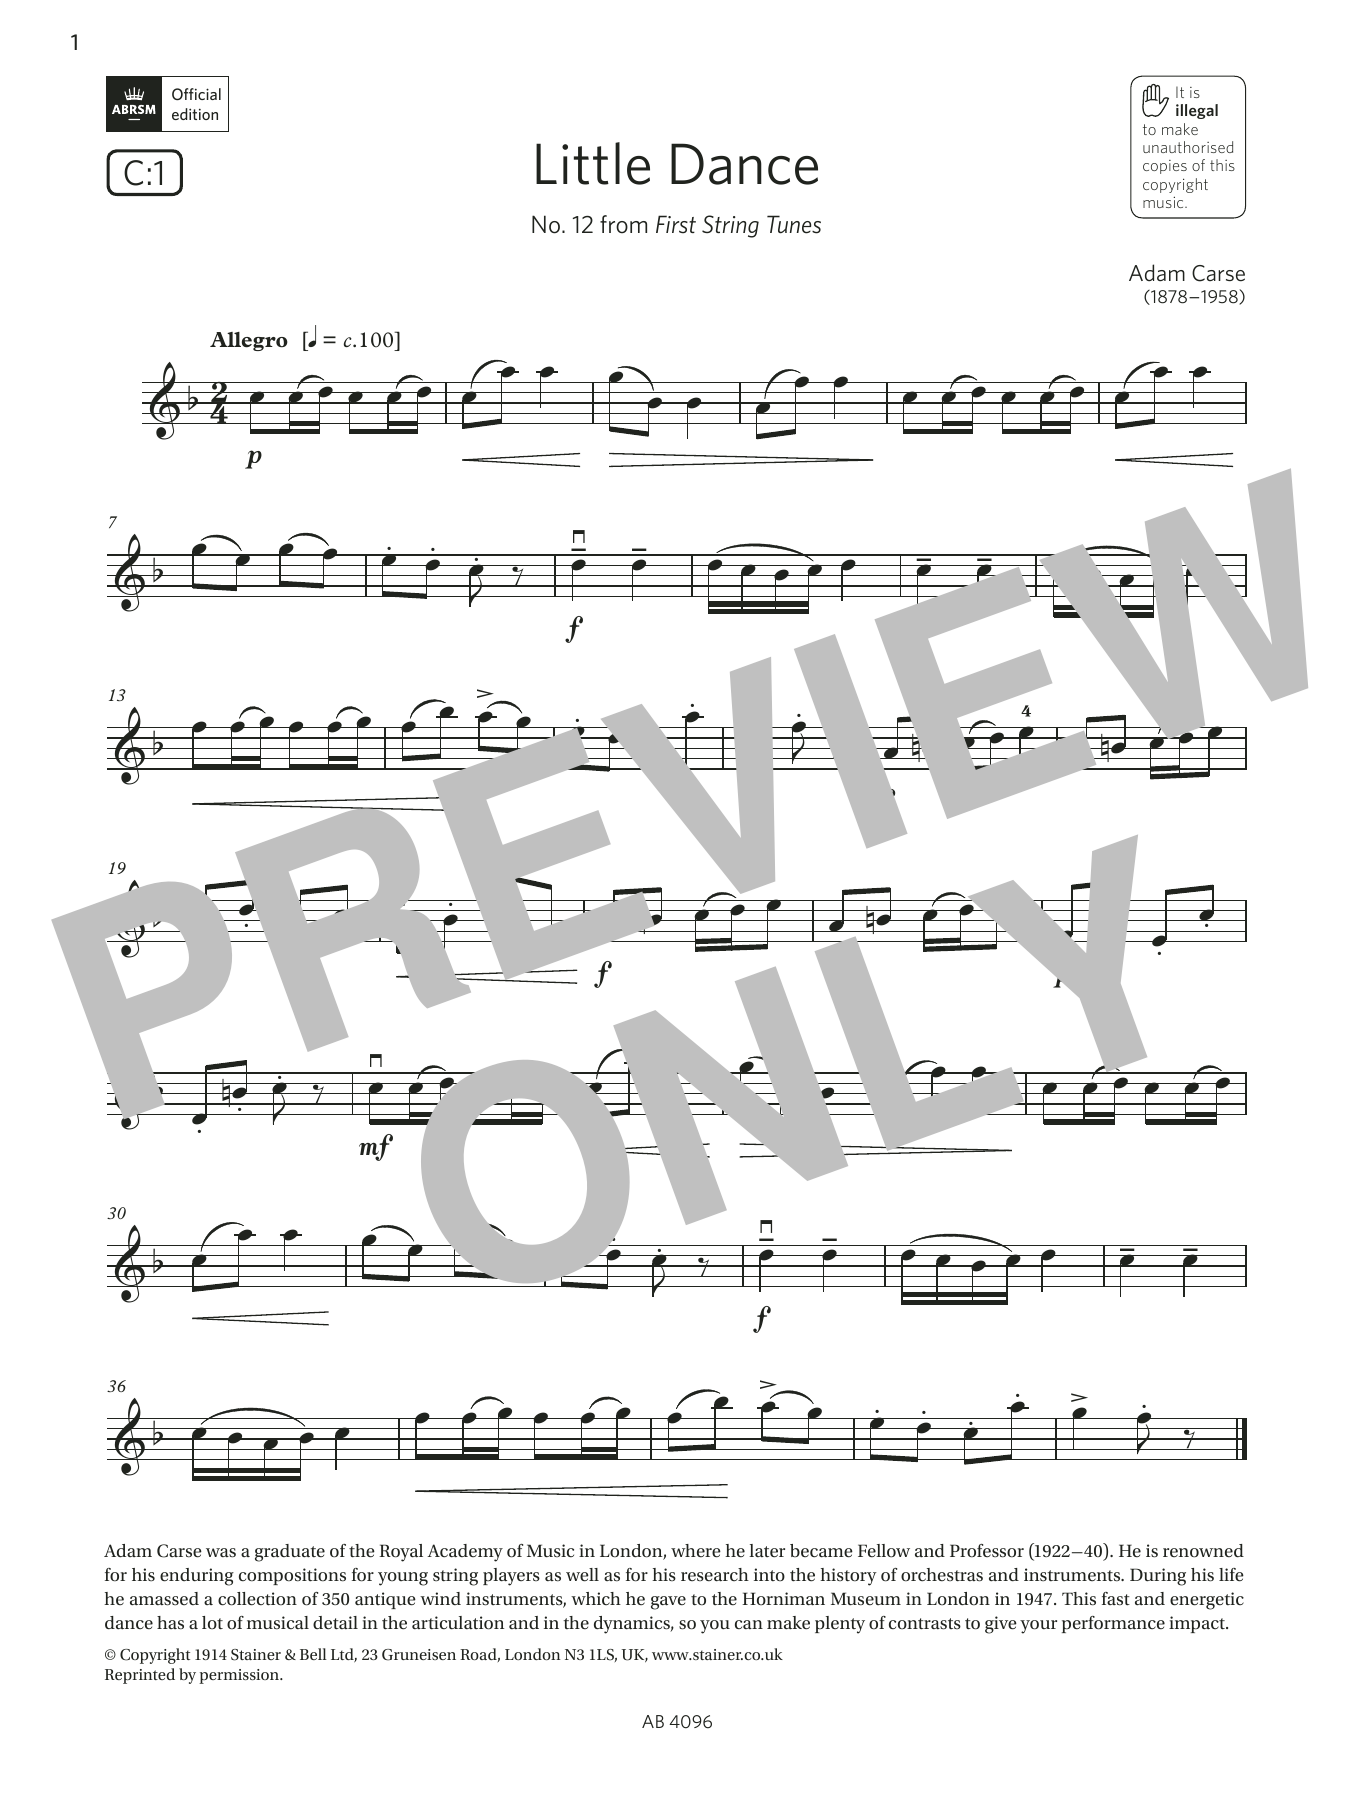 Download Adam Carse Little Dance (Grade 2, C1, from the ABR Sheet Music